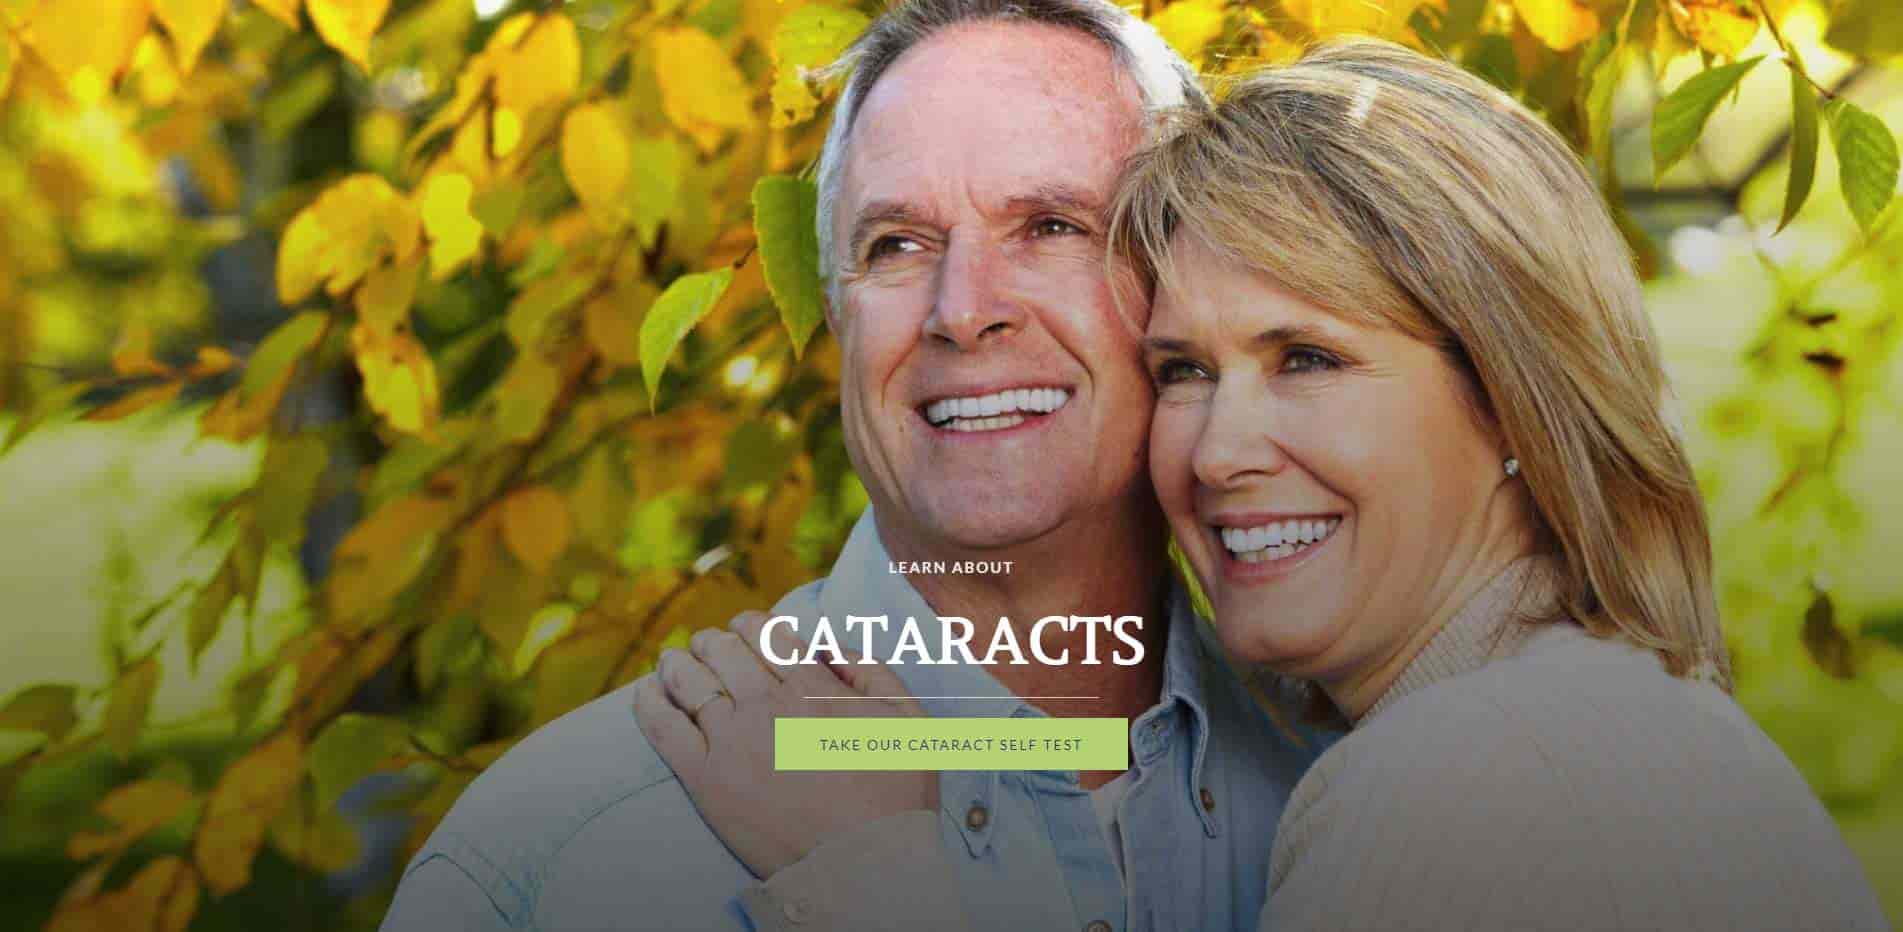 Learn about Cataracts